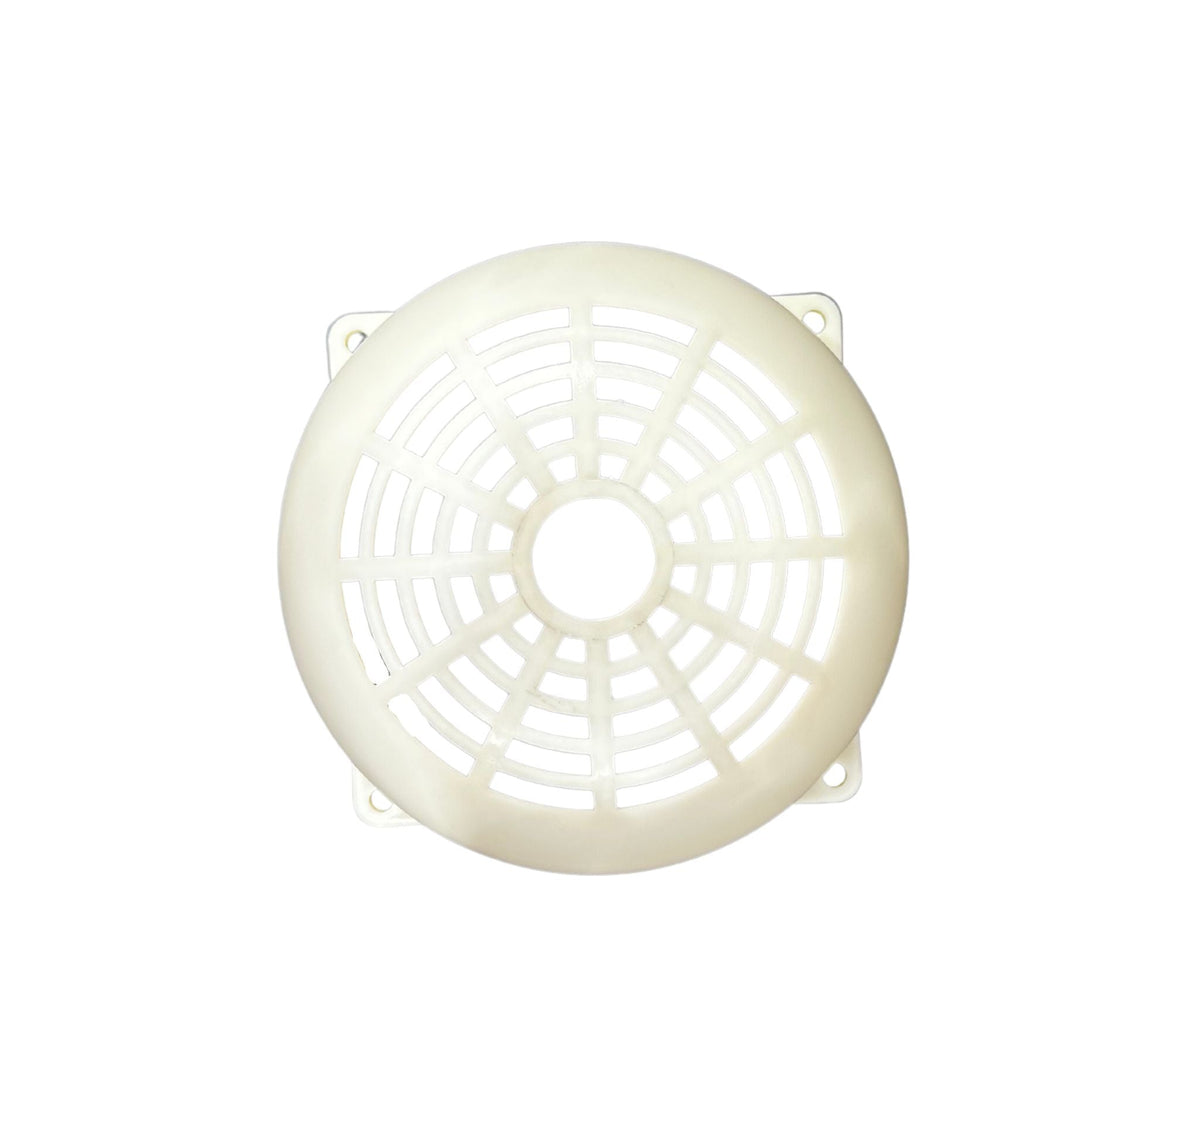 White circular fan guard with 4 holes in each corner for mounting